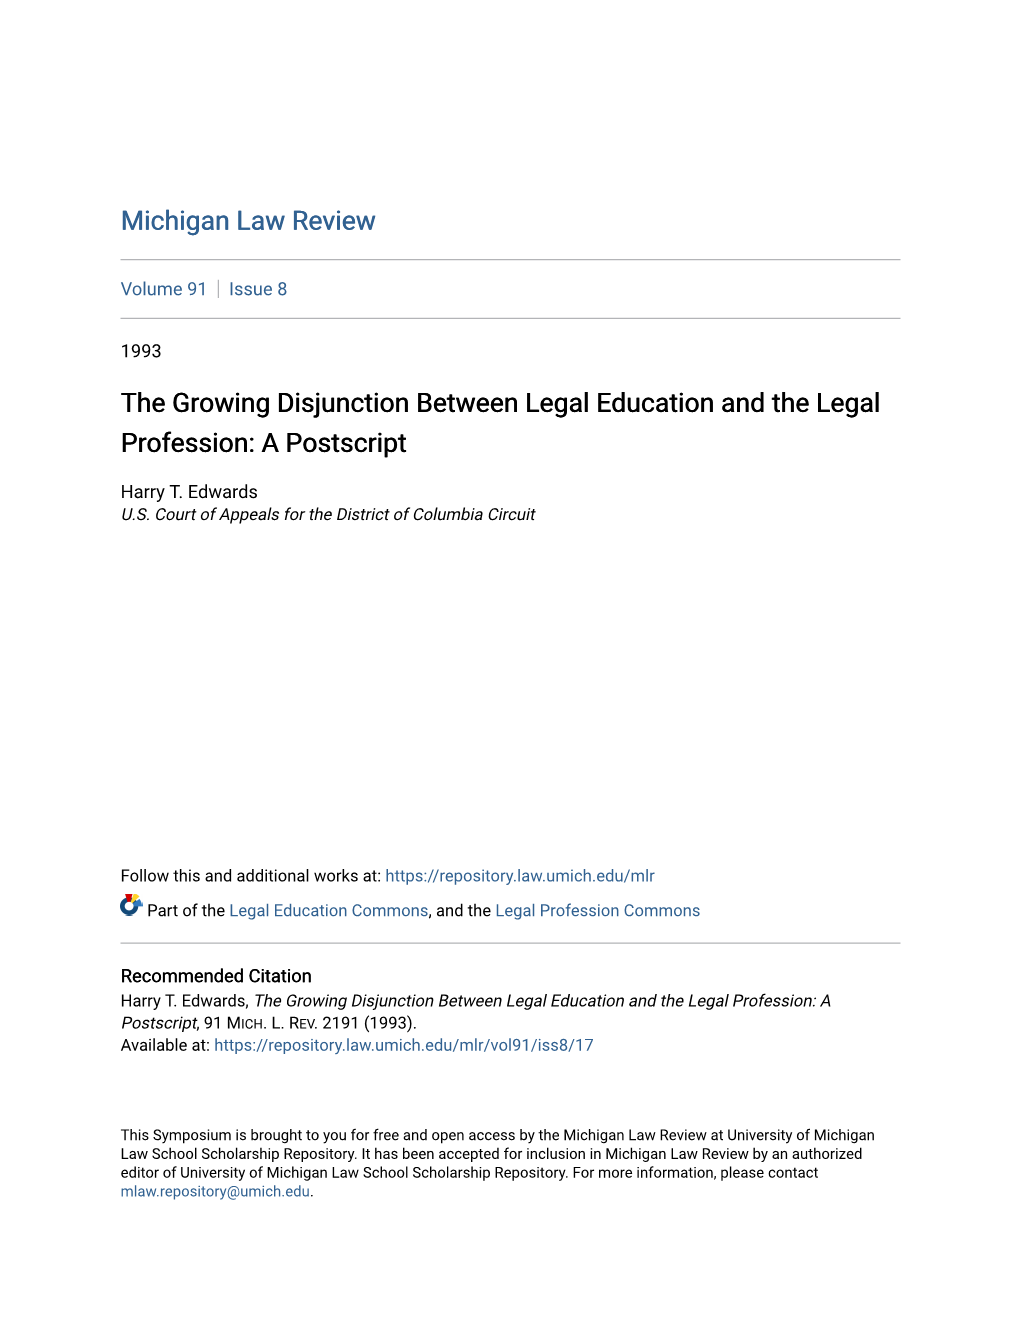 The Growing Disjunction Between Legal Education and the Legal Profession: a Postscript